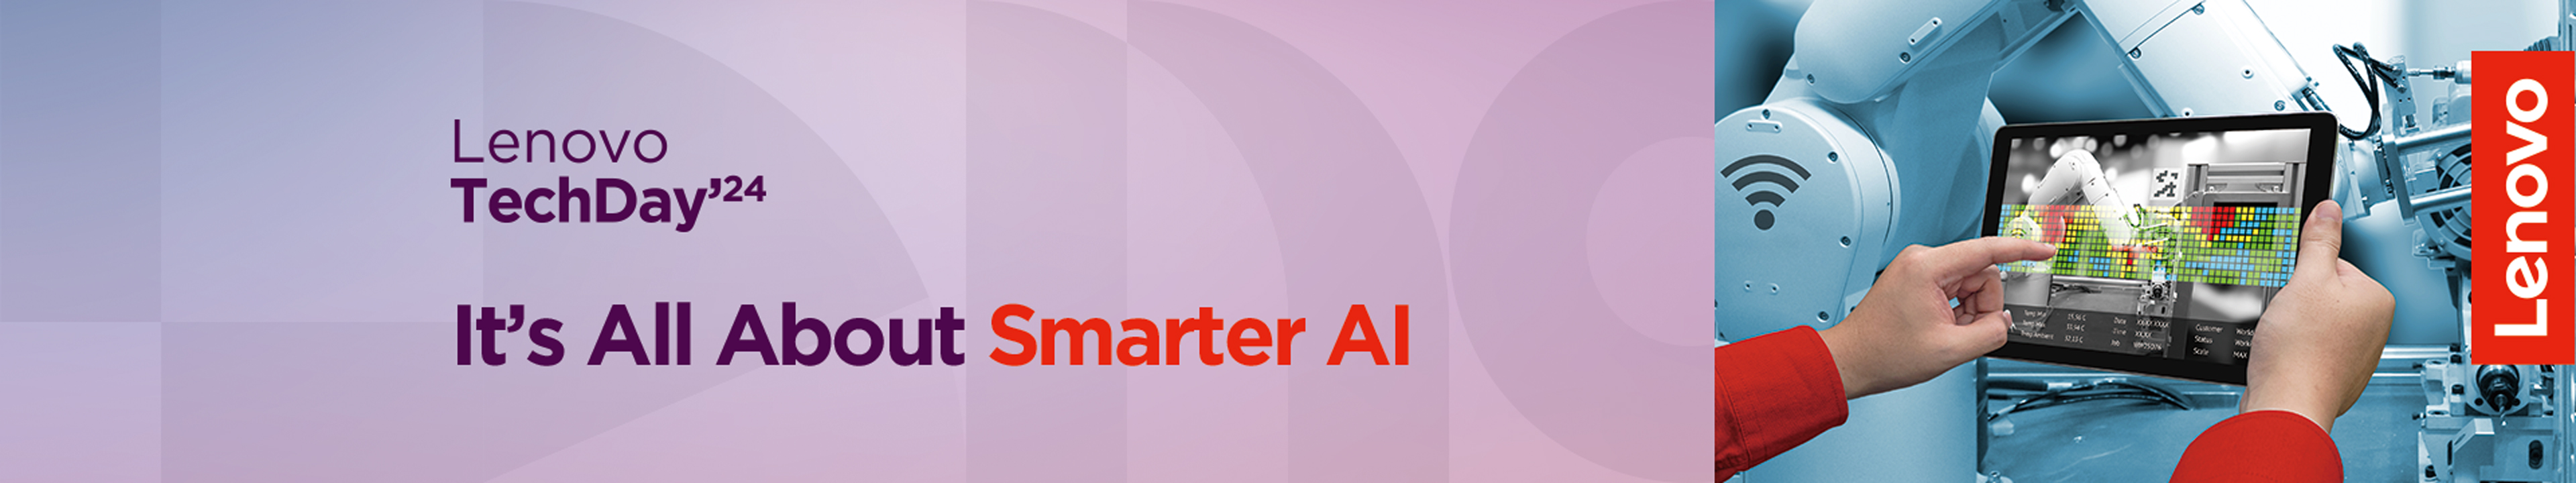 Lenovo TechDay24 It's All About Smarter AI